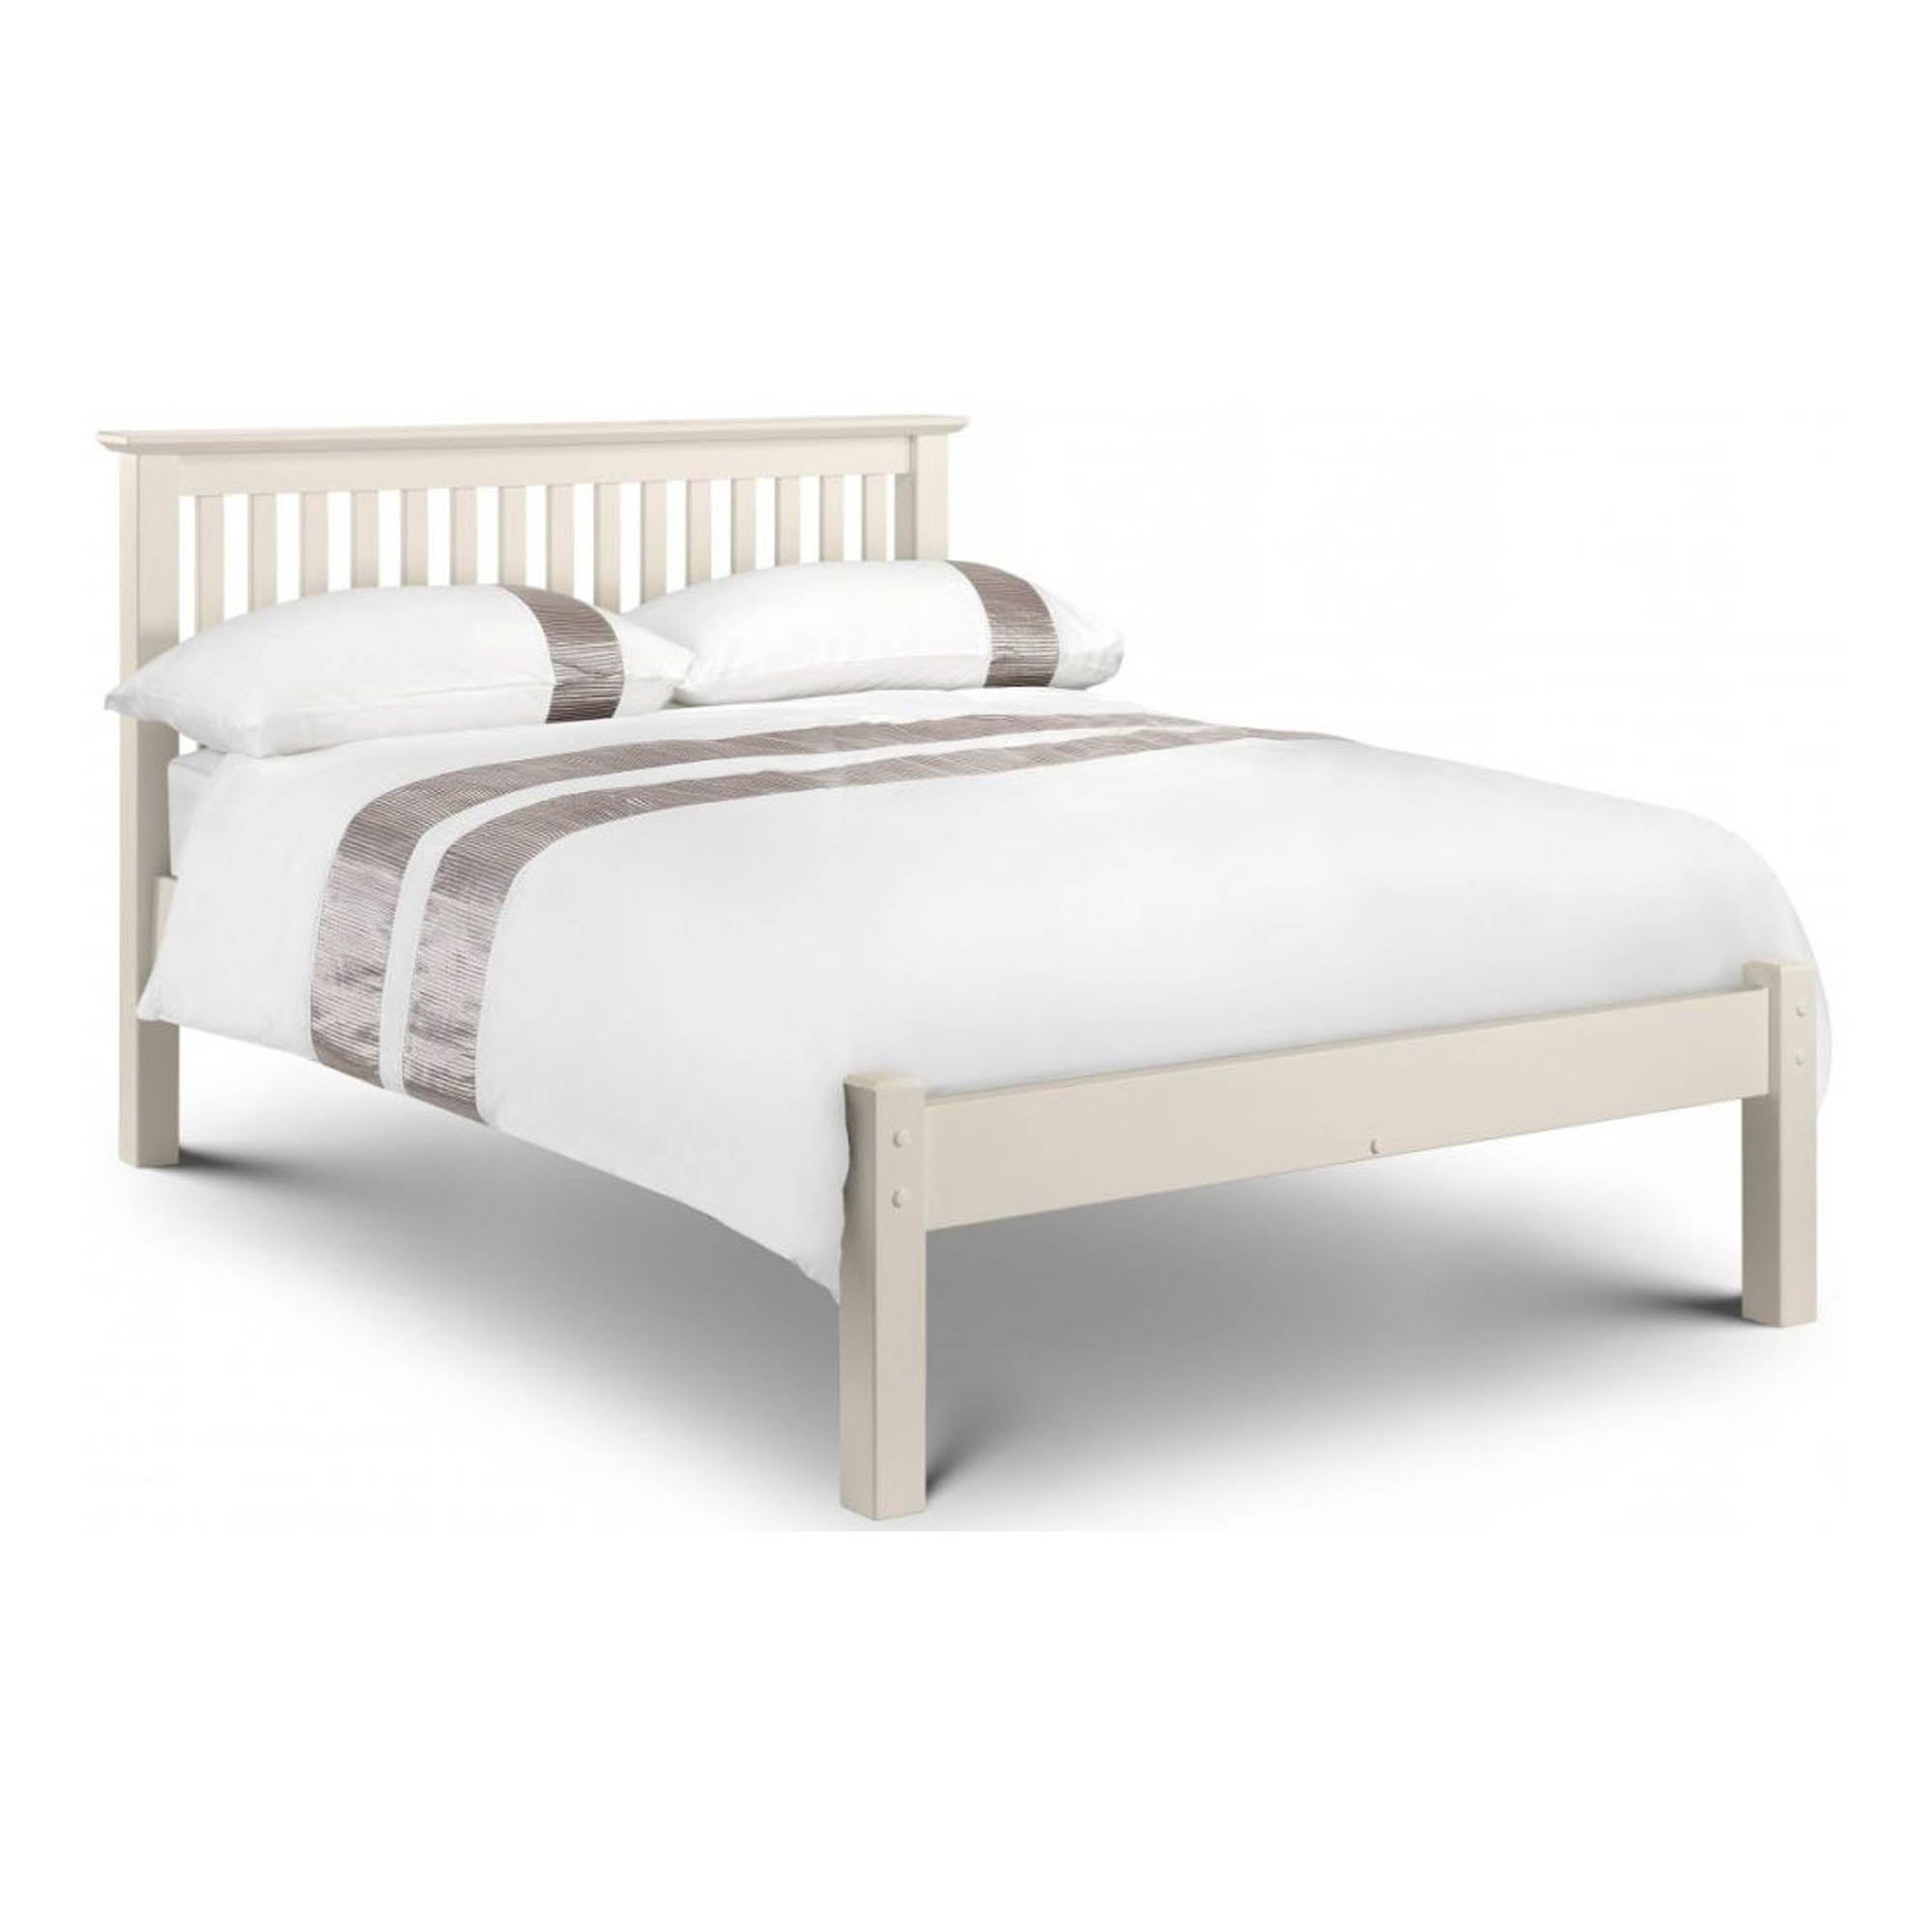 Barcelona Low Foot End Bed Frame White